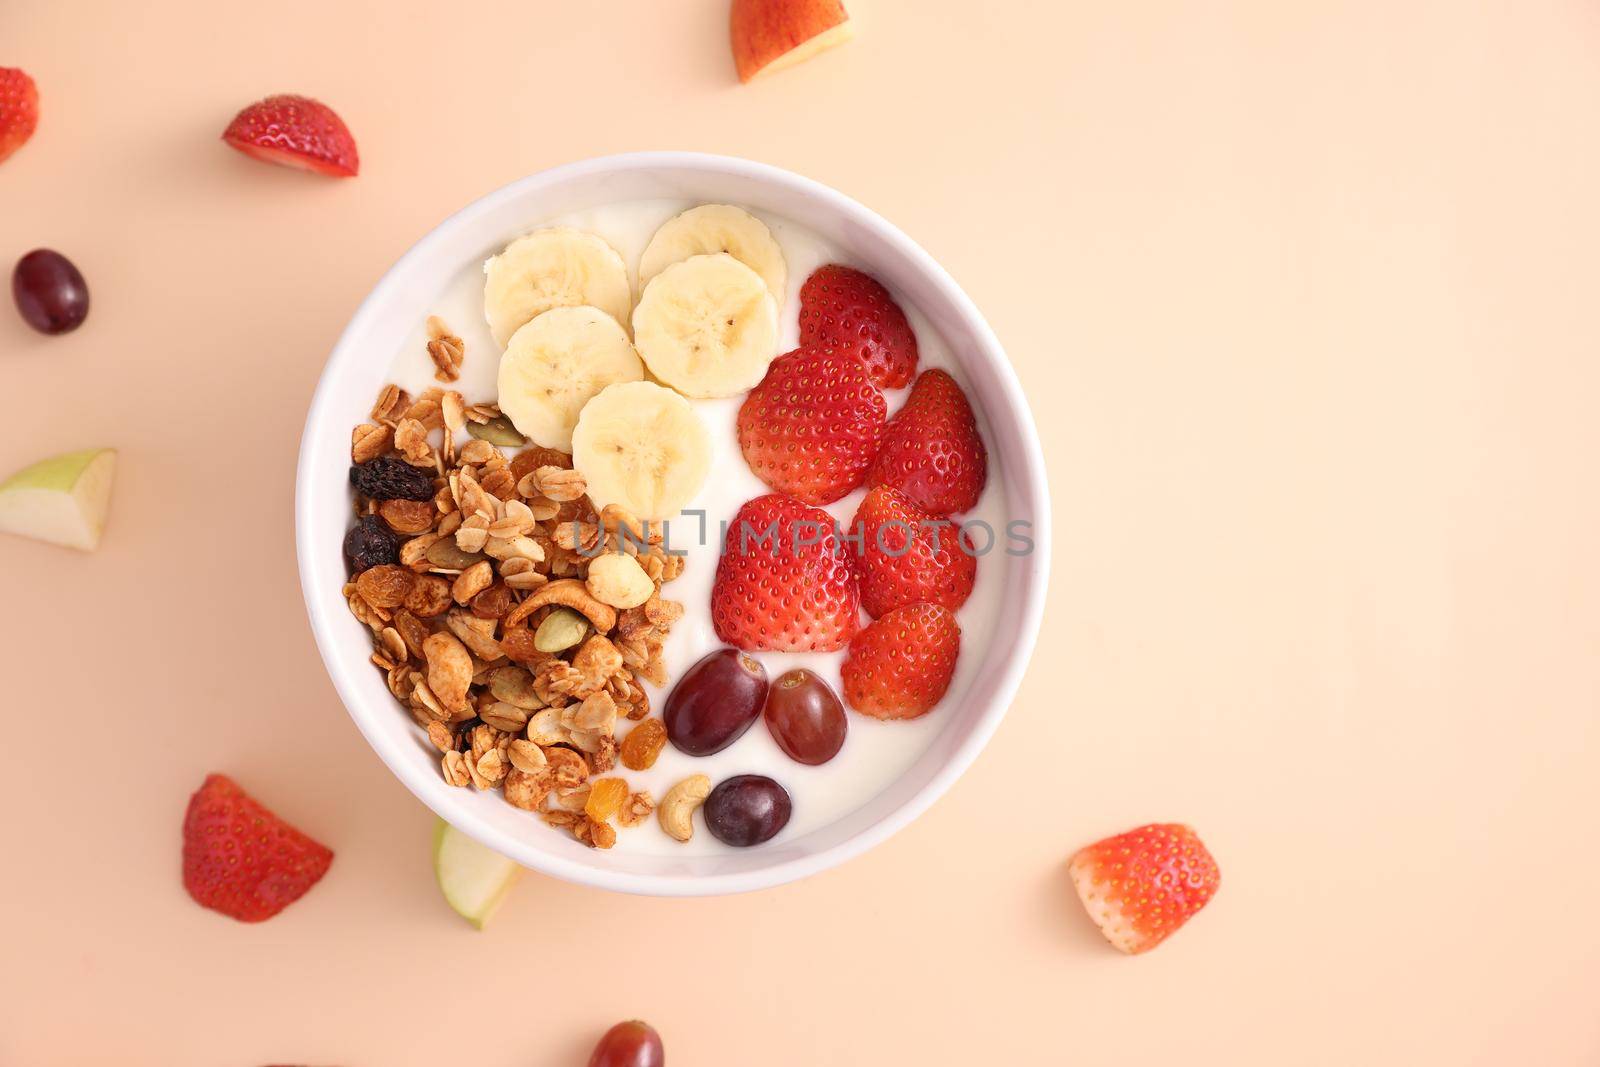 bowl of granola cereal with yogurt and berries isolated on eggnog color background